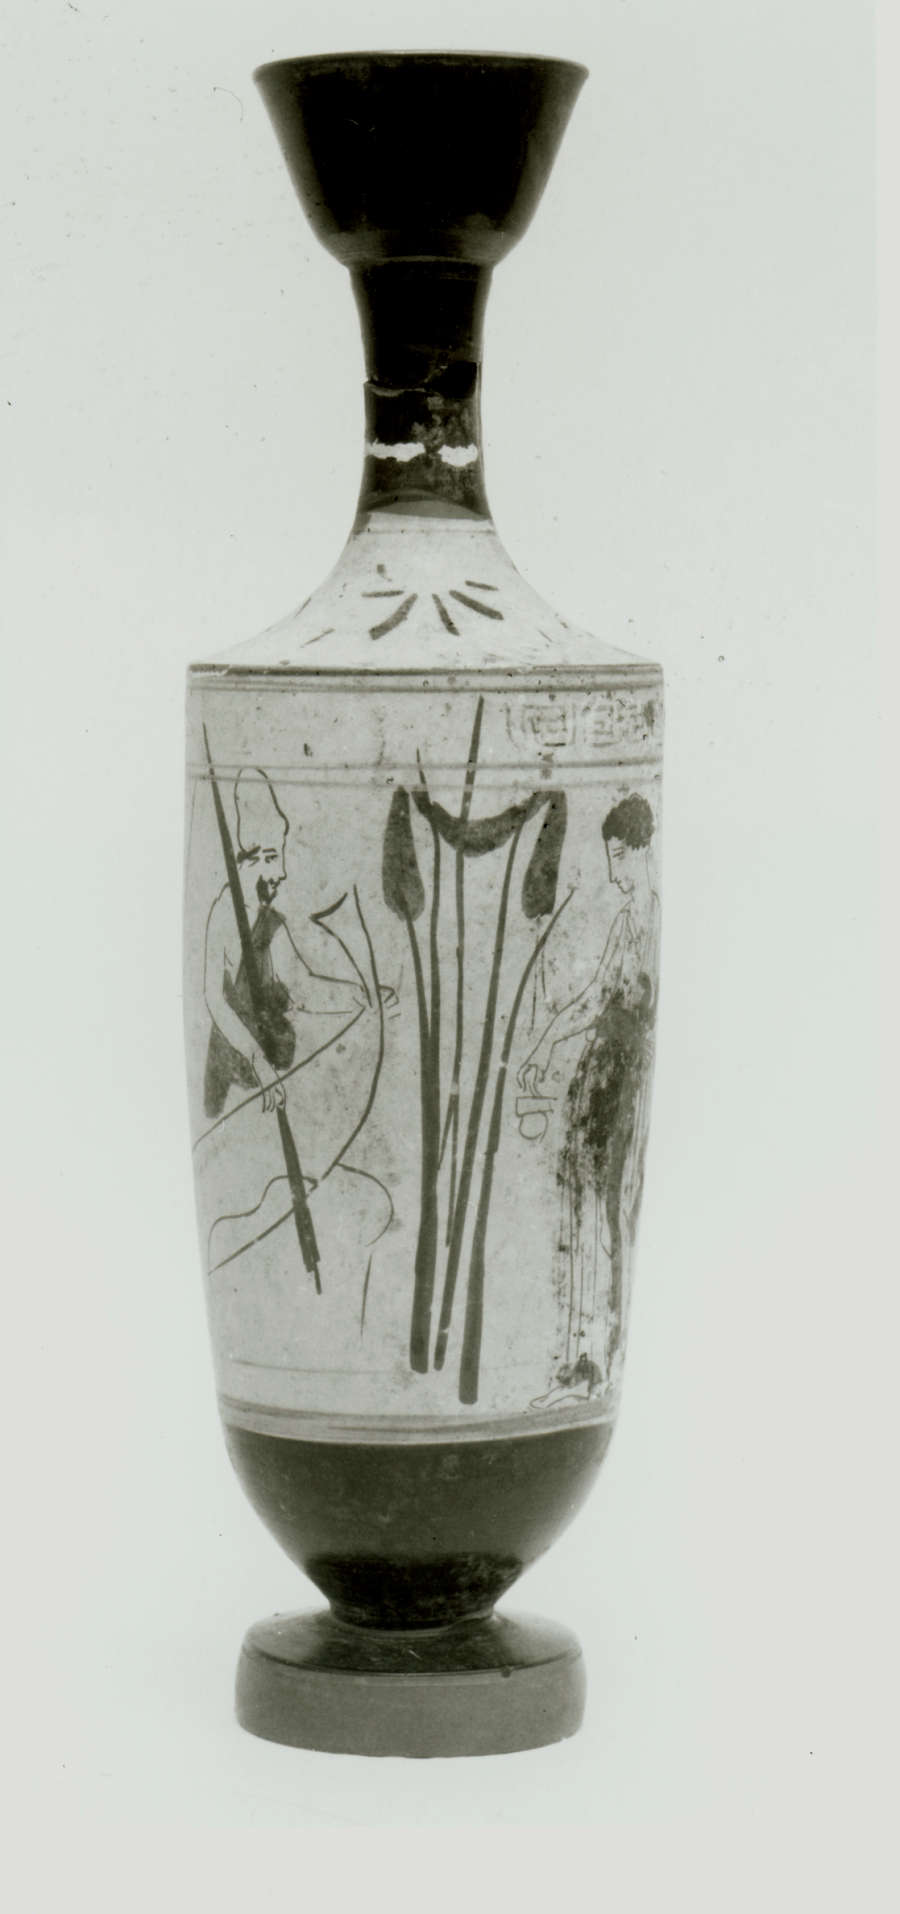 Monochromatic image of a vase with a narrow fluted neck and thick foot. It’s decorated with illustrations of a figure in a boat facing another standing figure, divided by reeds.